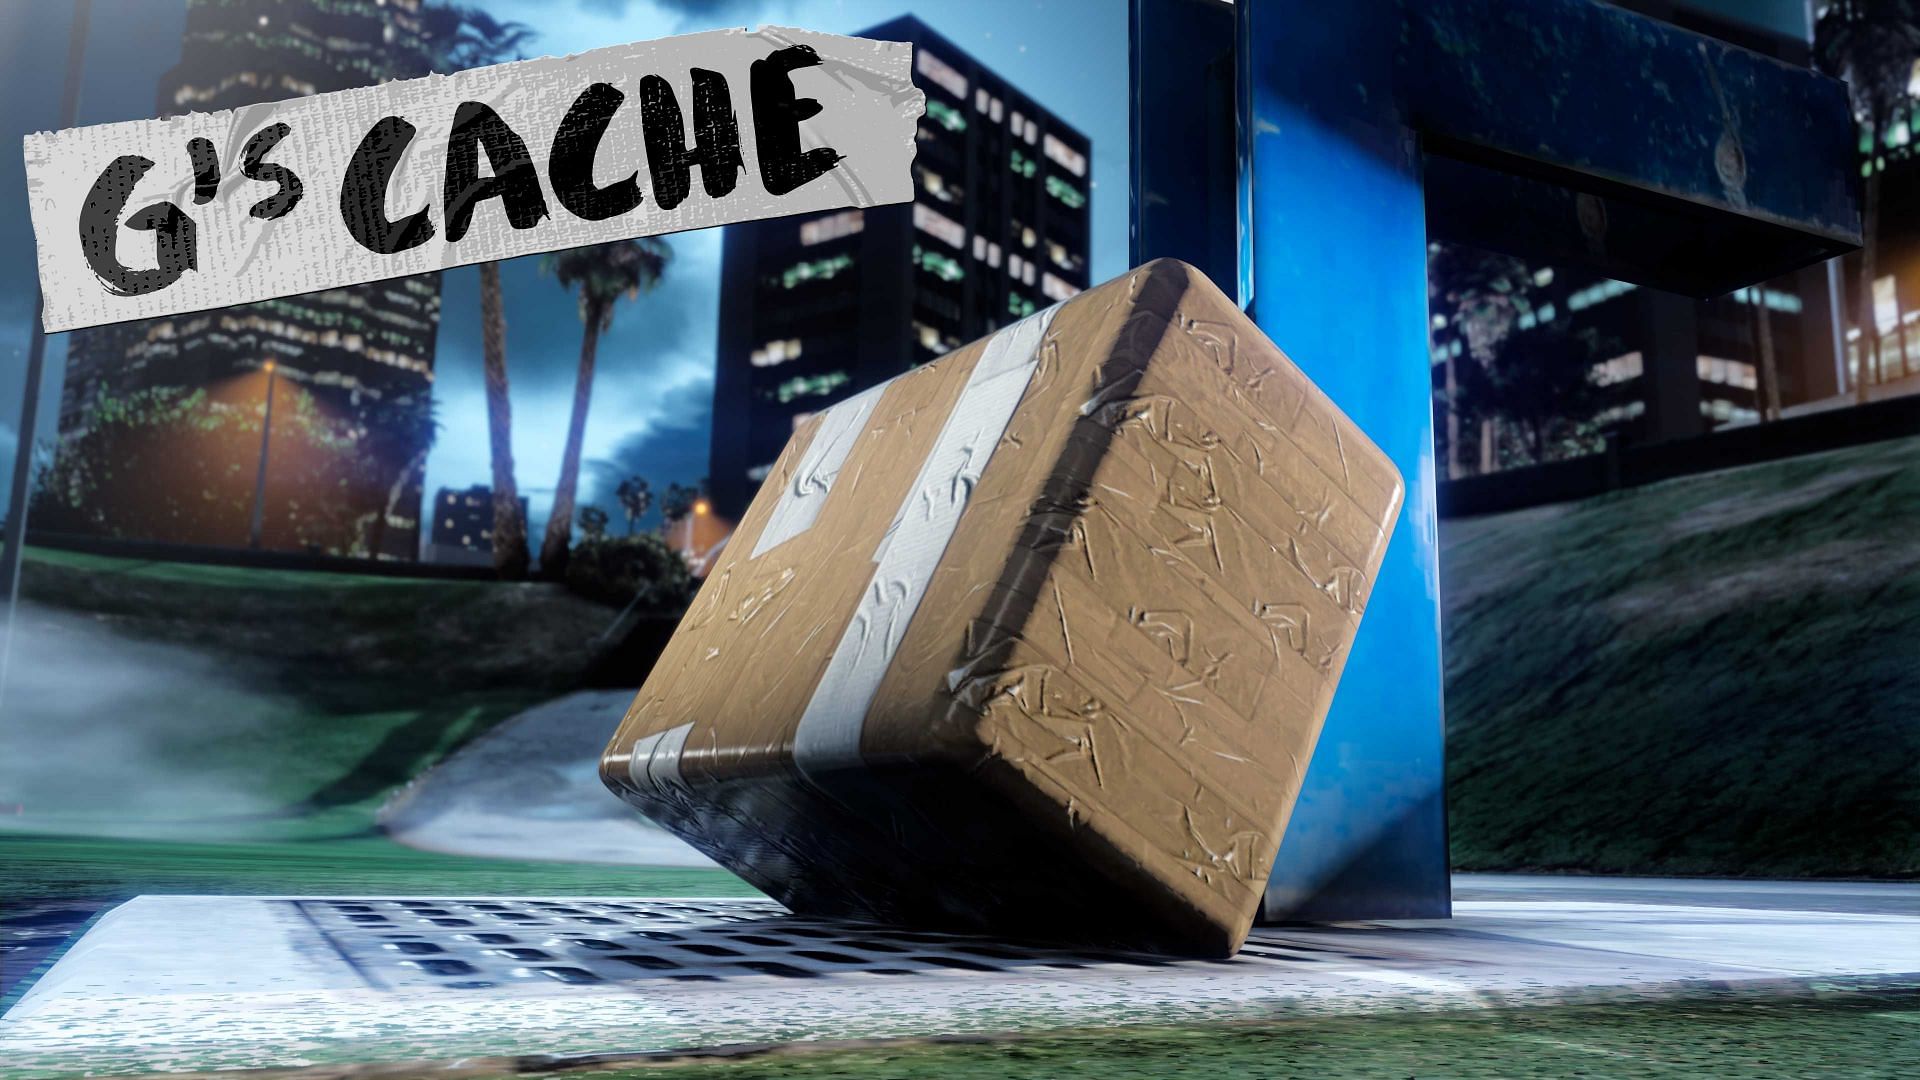 This is what G&#039;s Cache looks like (Image via Rockstar Games)